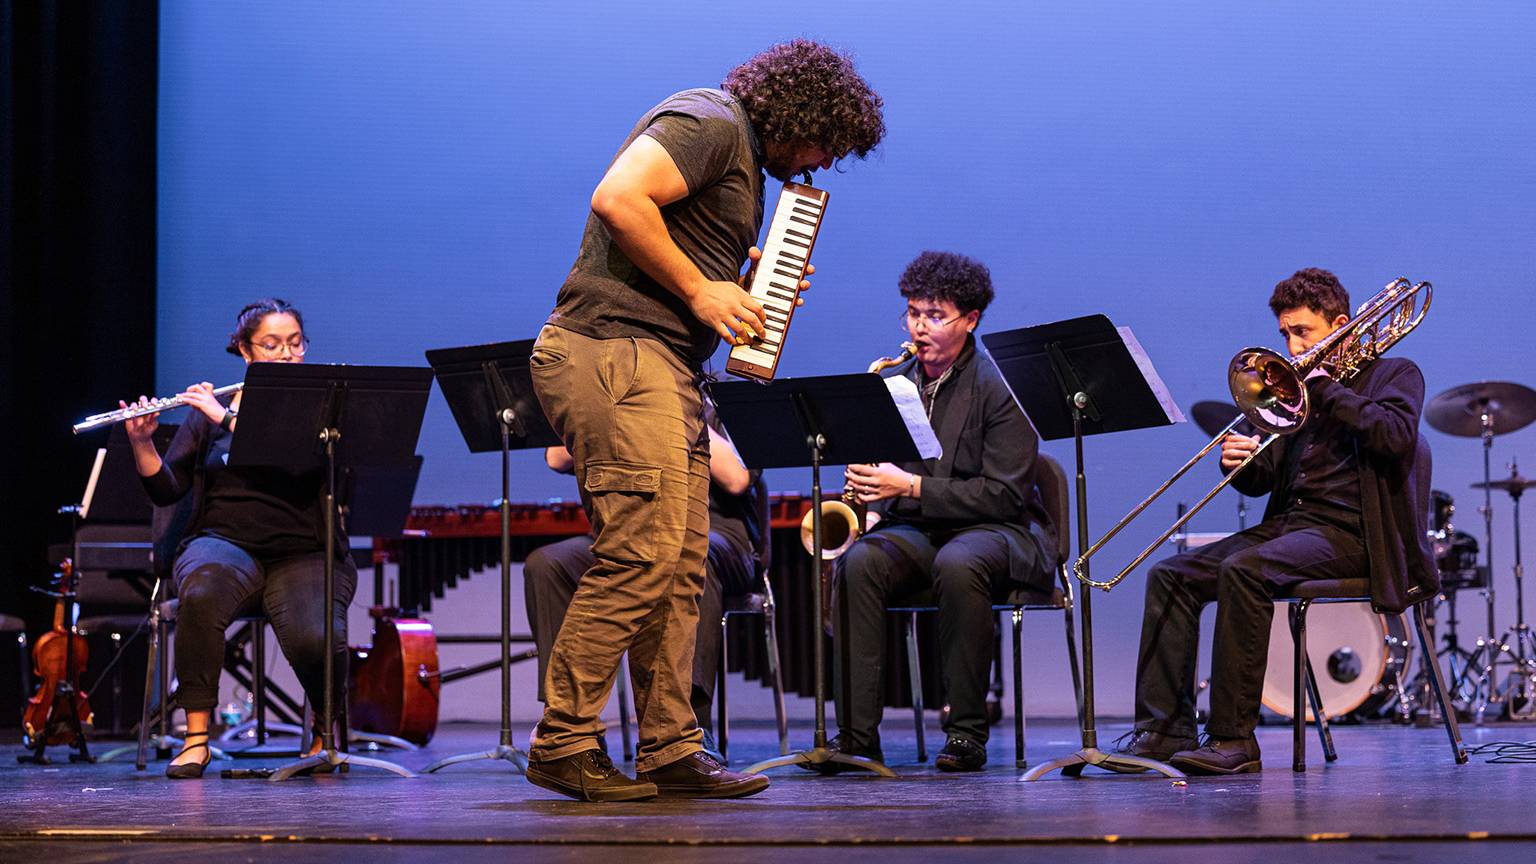 Jay Nava, middle, plays the melodica on stage in front of an ensemble during his hip-hop opera.